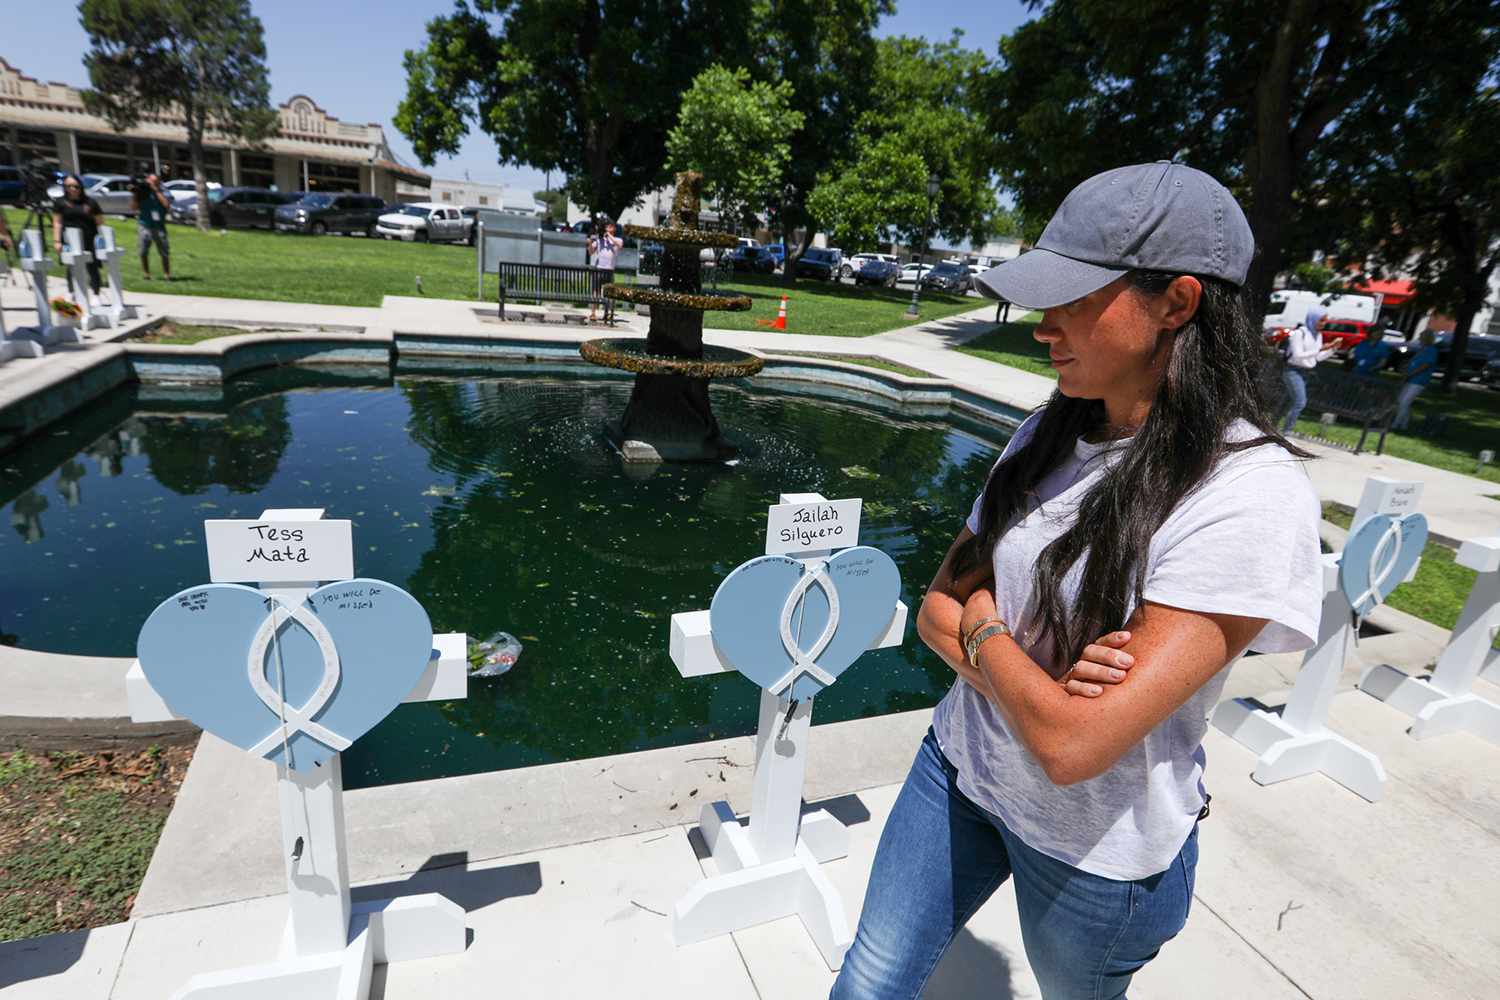 Britain's Duchess of Sussex, Meghan Markle pays respect at a makeshift memorial outside Uvalde County Courthouse in Uvalde, Texas, on May 26, 2022. Flowers are placed on a makeshift memorial in front of Robb Elementary School after mass school shooting which 21 people killed in Uvalde, Texas on Wednesday.